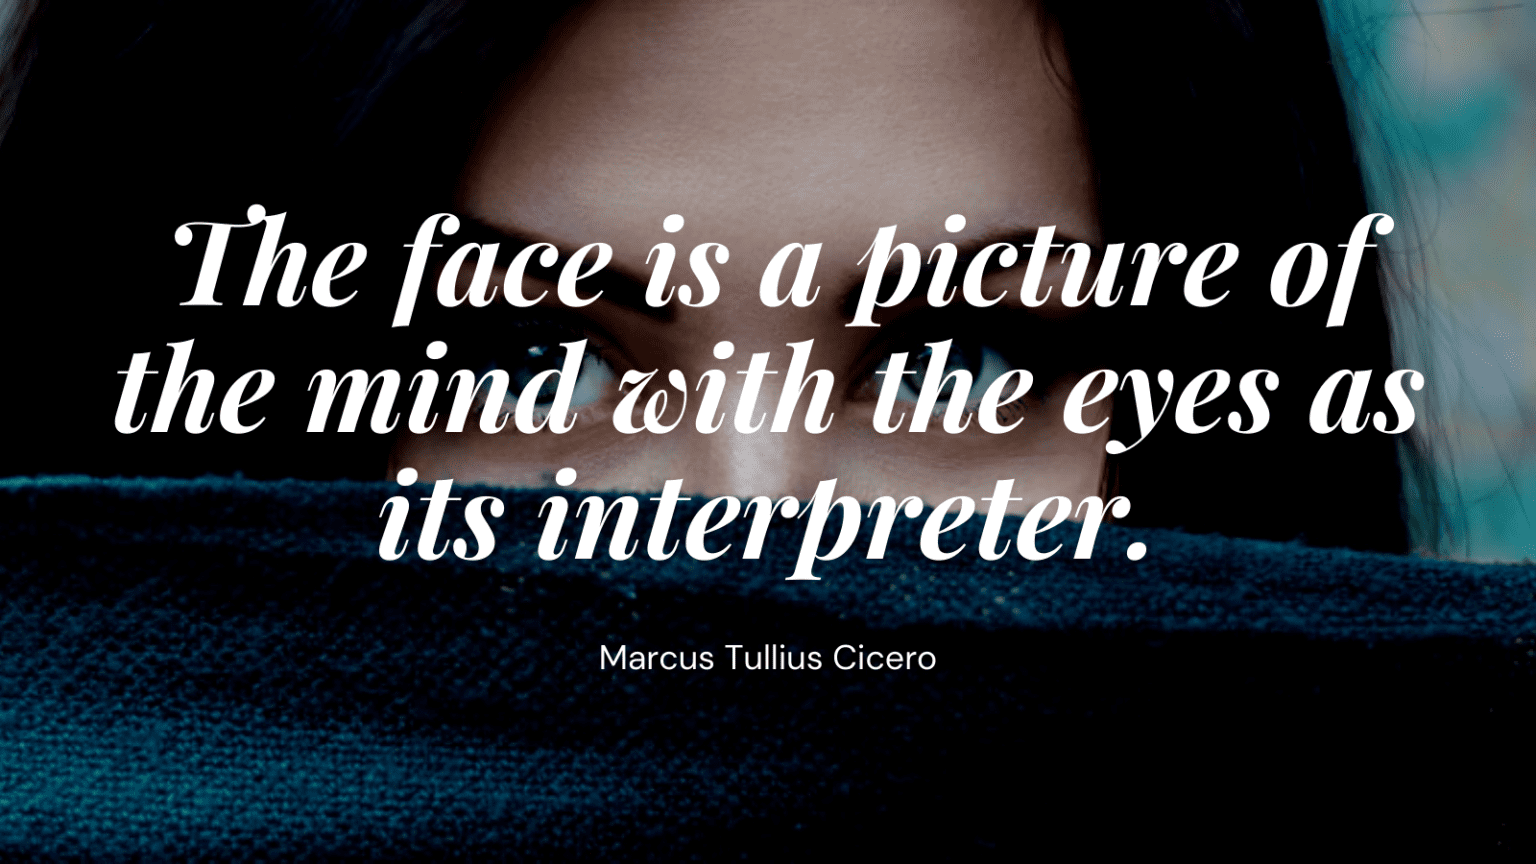 36 Quotes About Face as Inspirational and Humorous | Quotekind